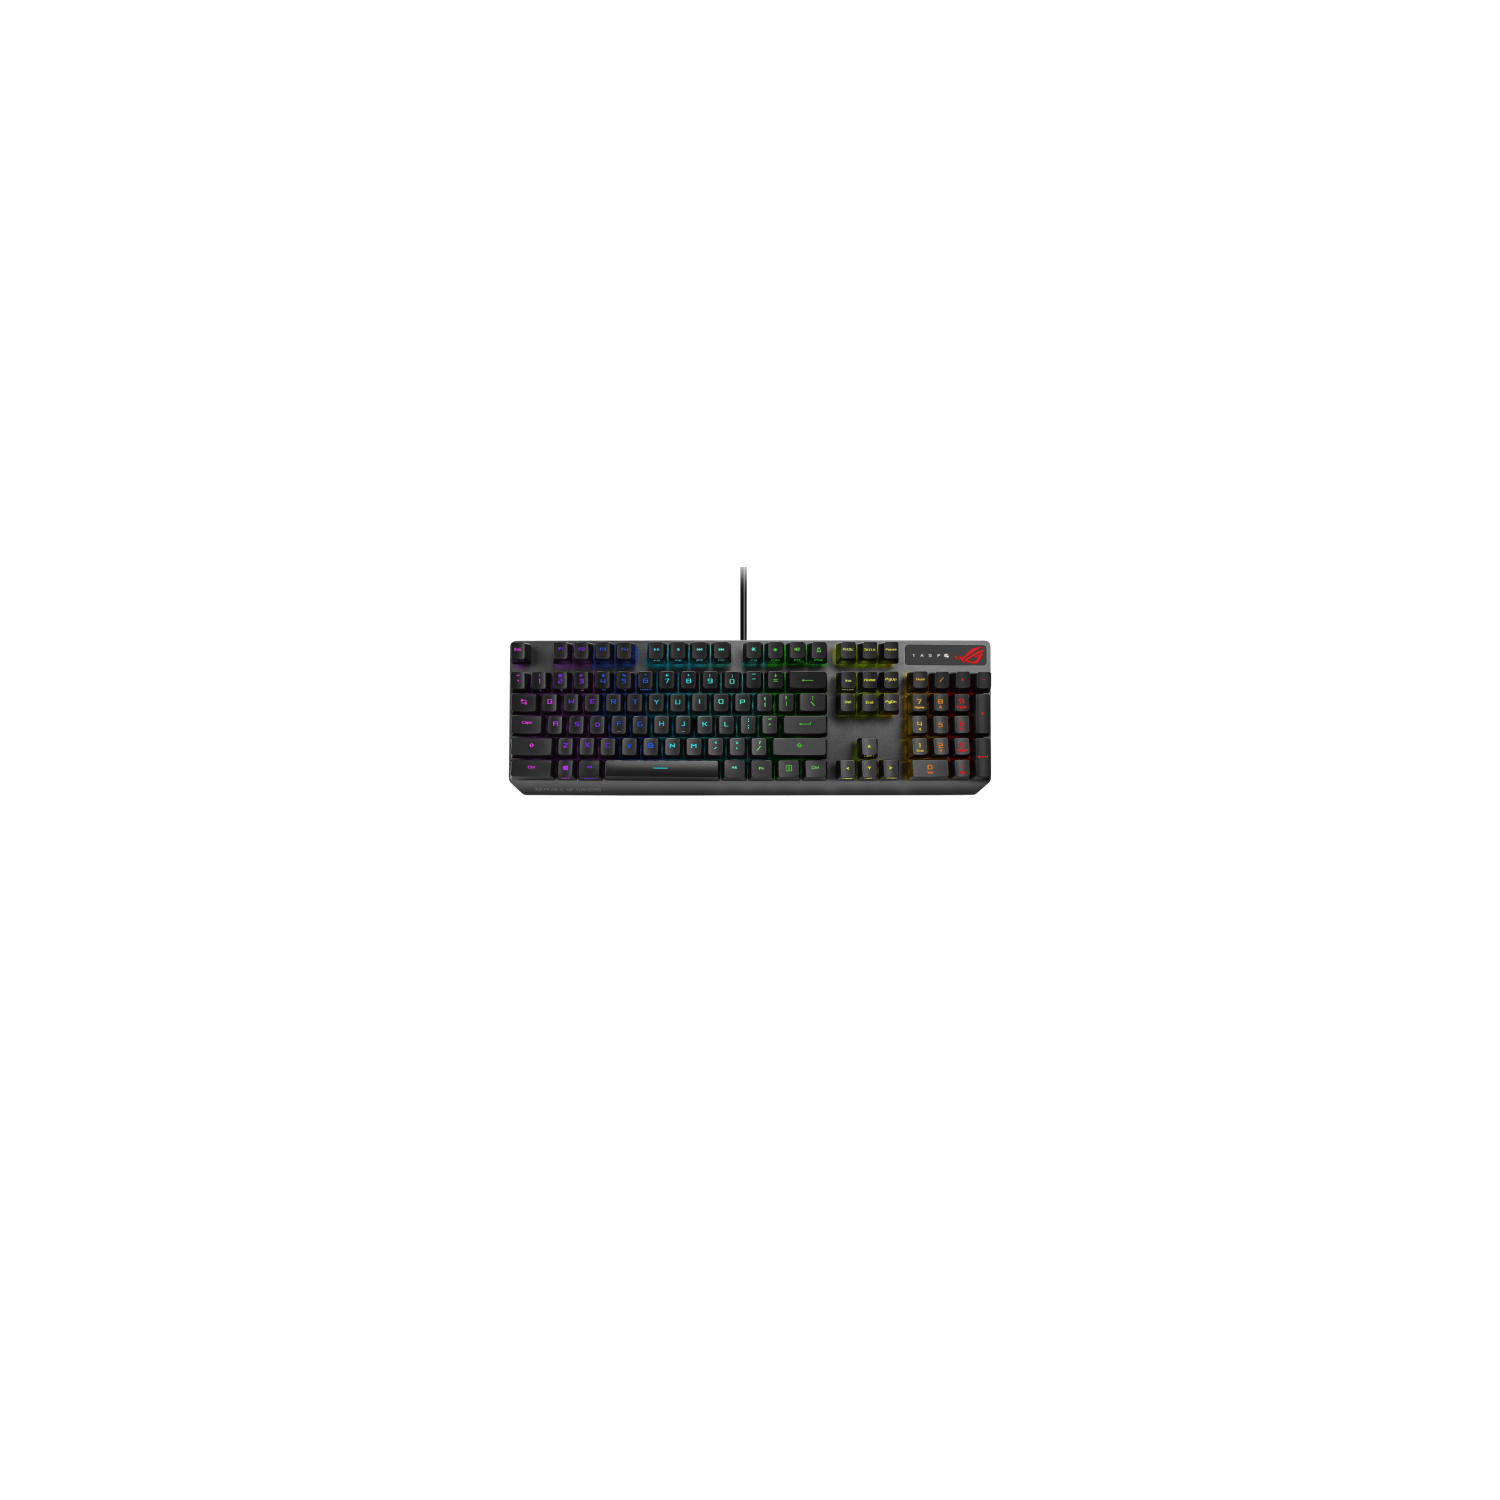 ASUS ROG Strix Scope RX Gaming Keyboard (ROG RX Optical Mechanical Switches, Pro